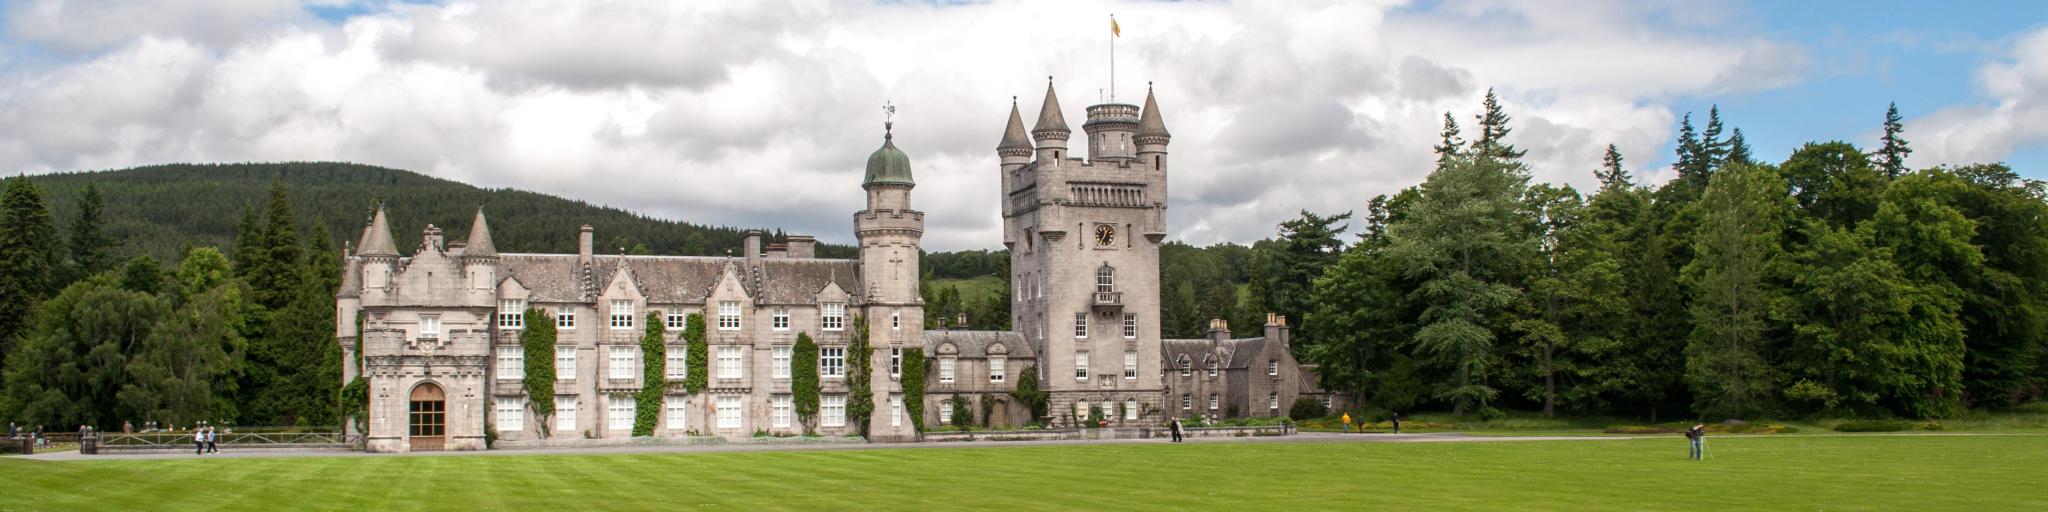 View of the Royal Balmoral Castle and lush green grounds and landscape, Scotland